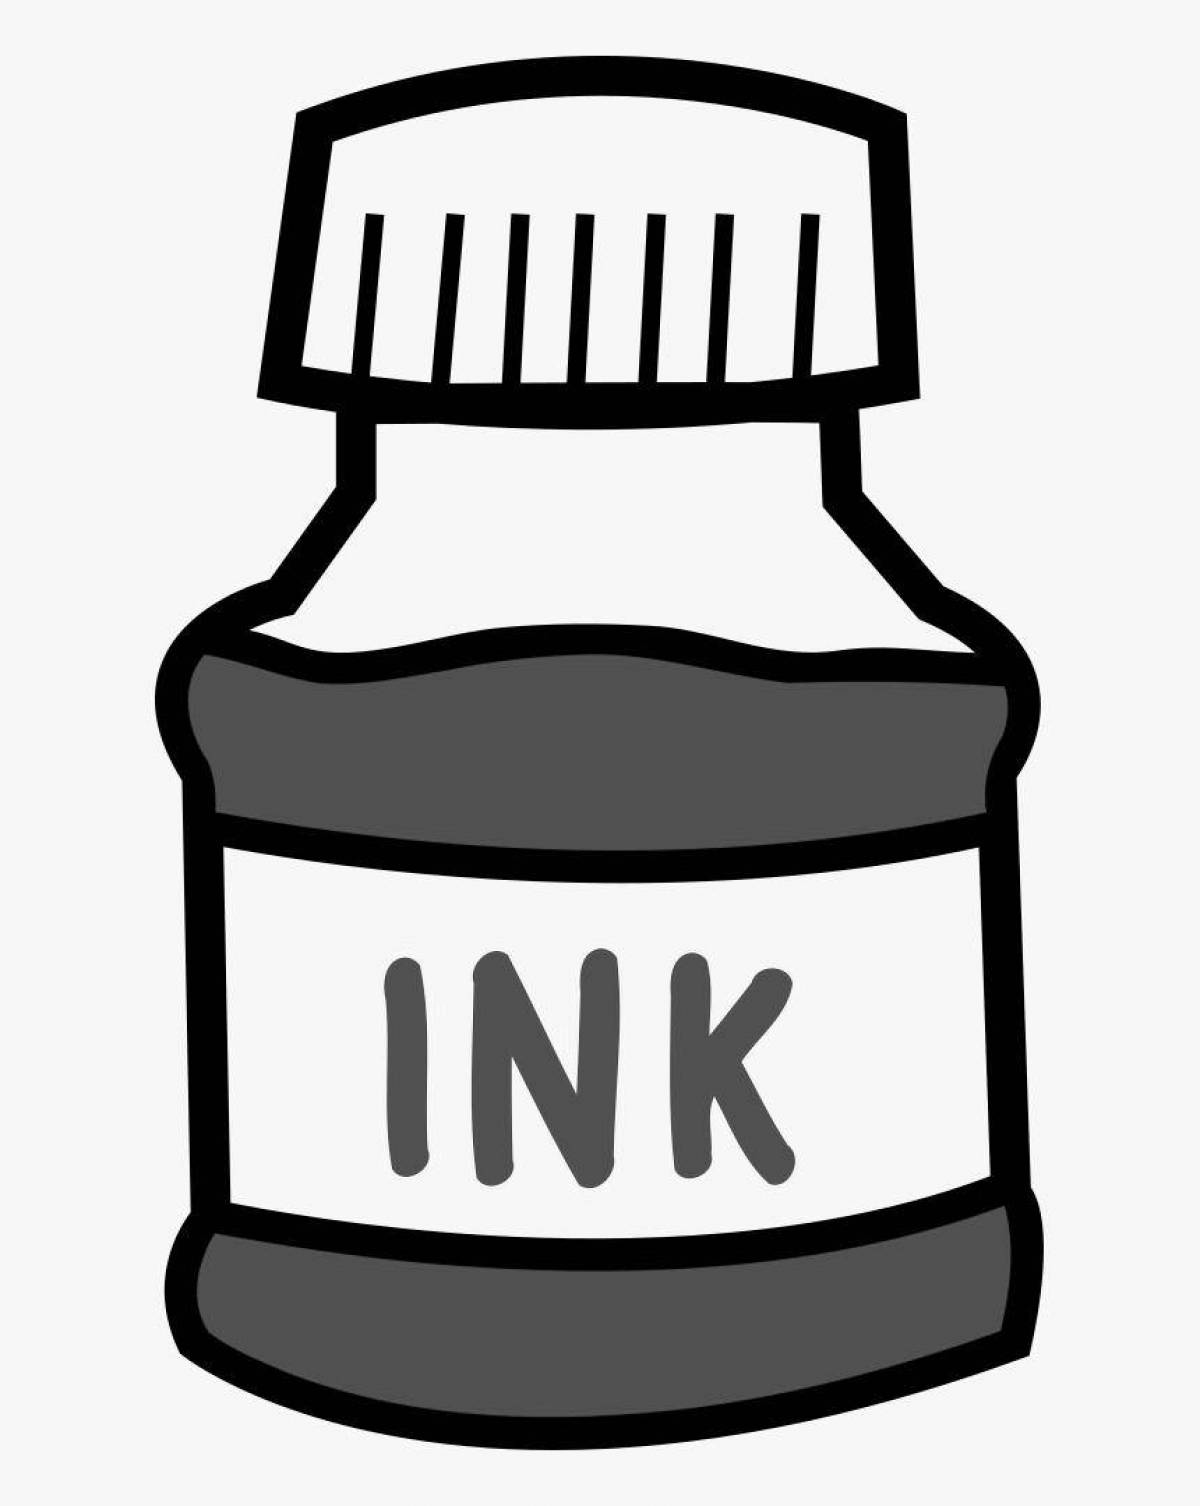 Luminous ink for coloring